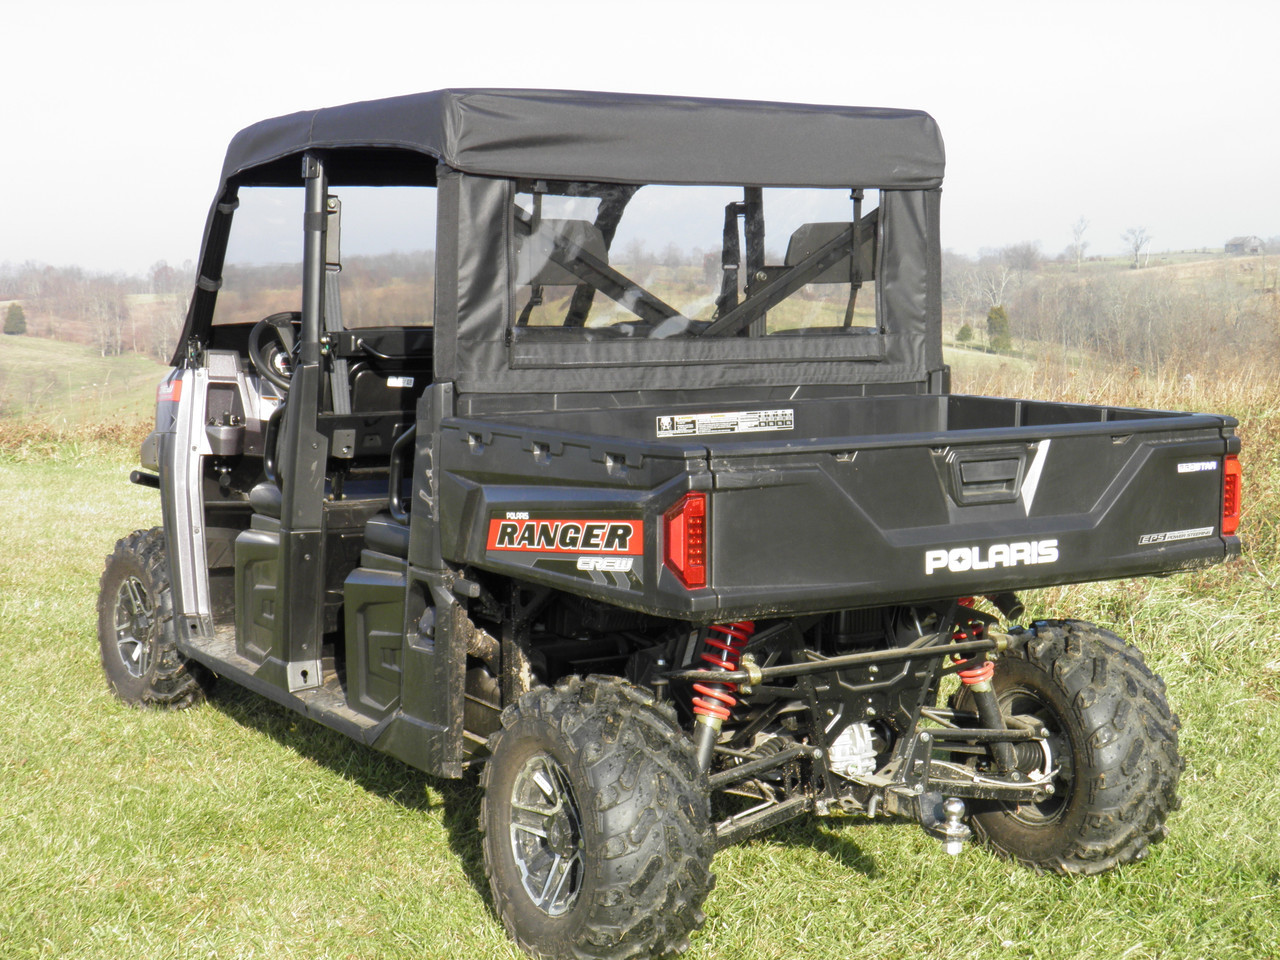 3 Star side x side Polaris Ranger Crew 1000/XP1000 vinyl windshield top and rear window rear angle view